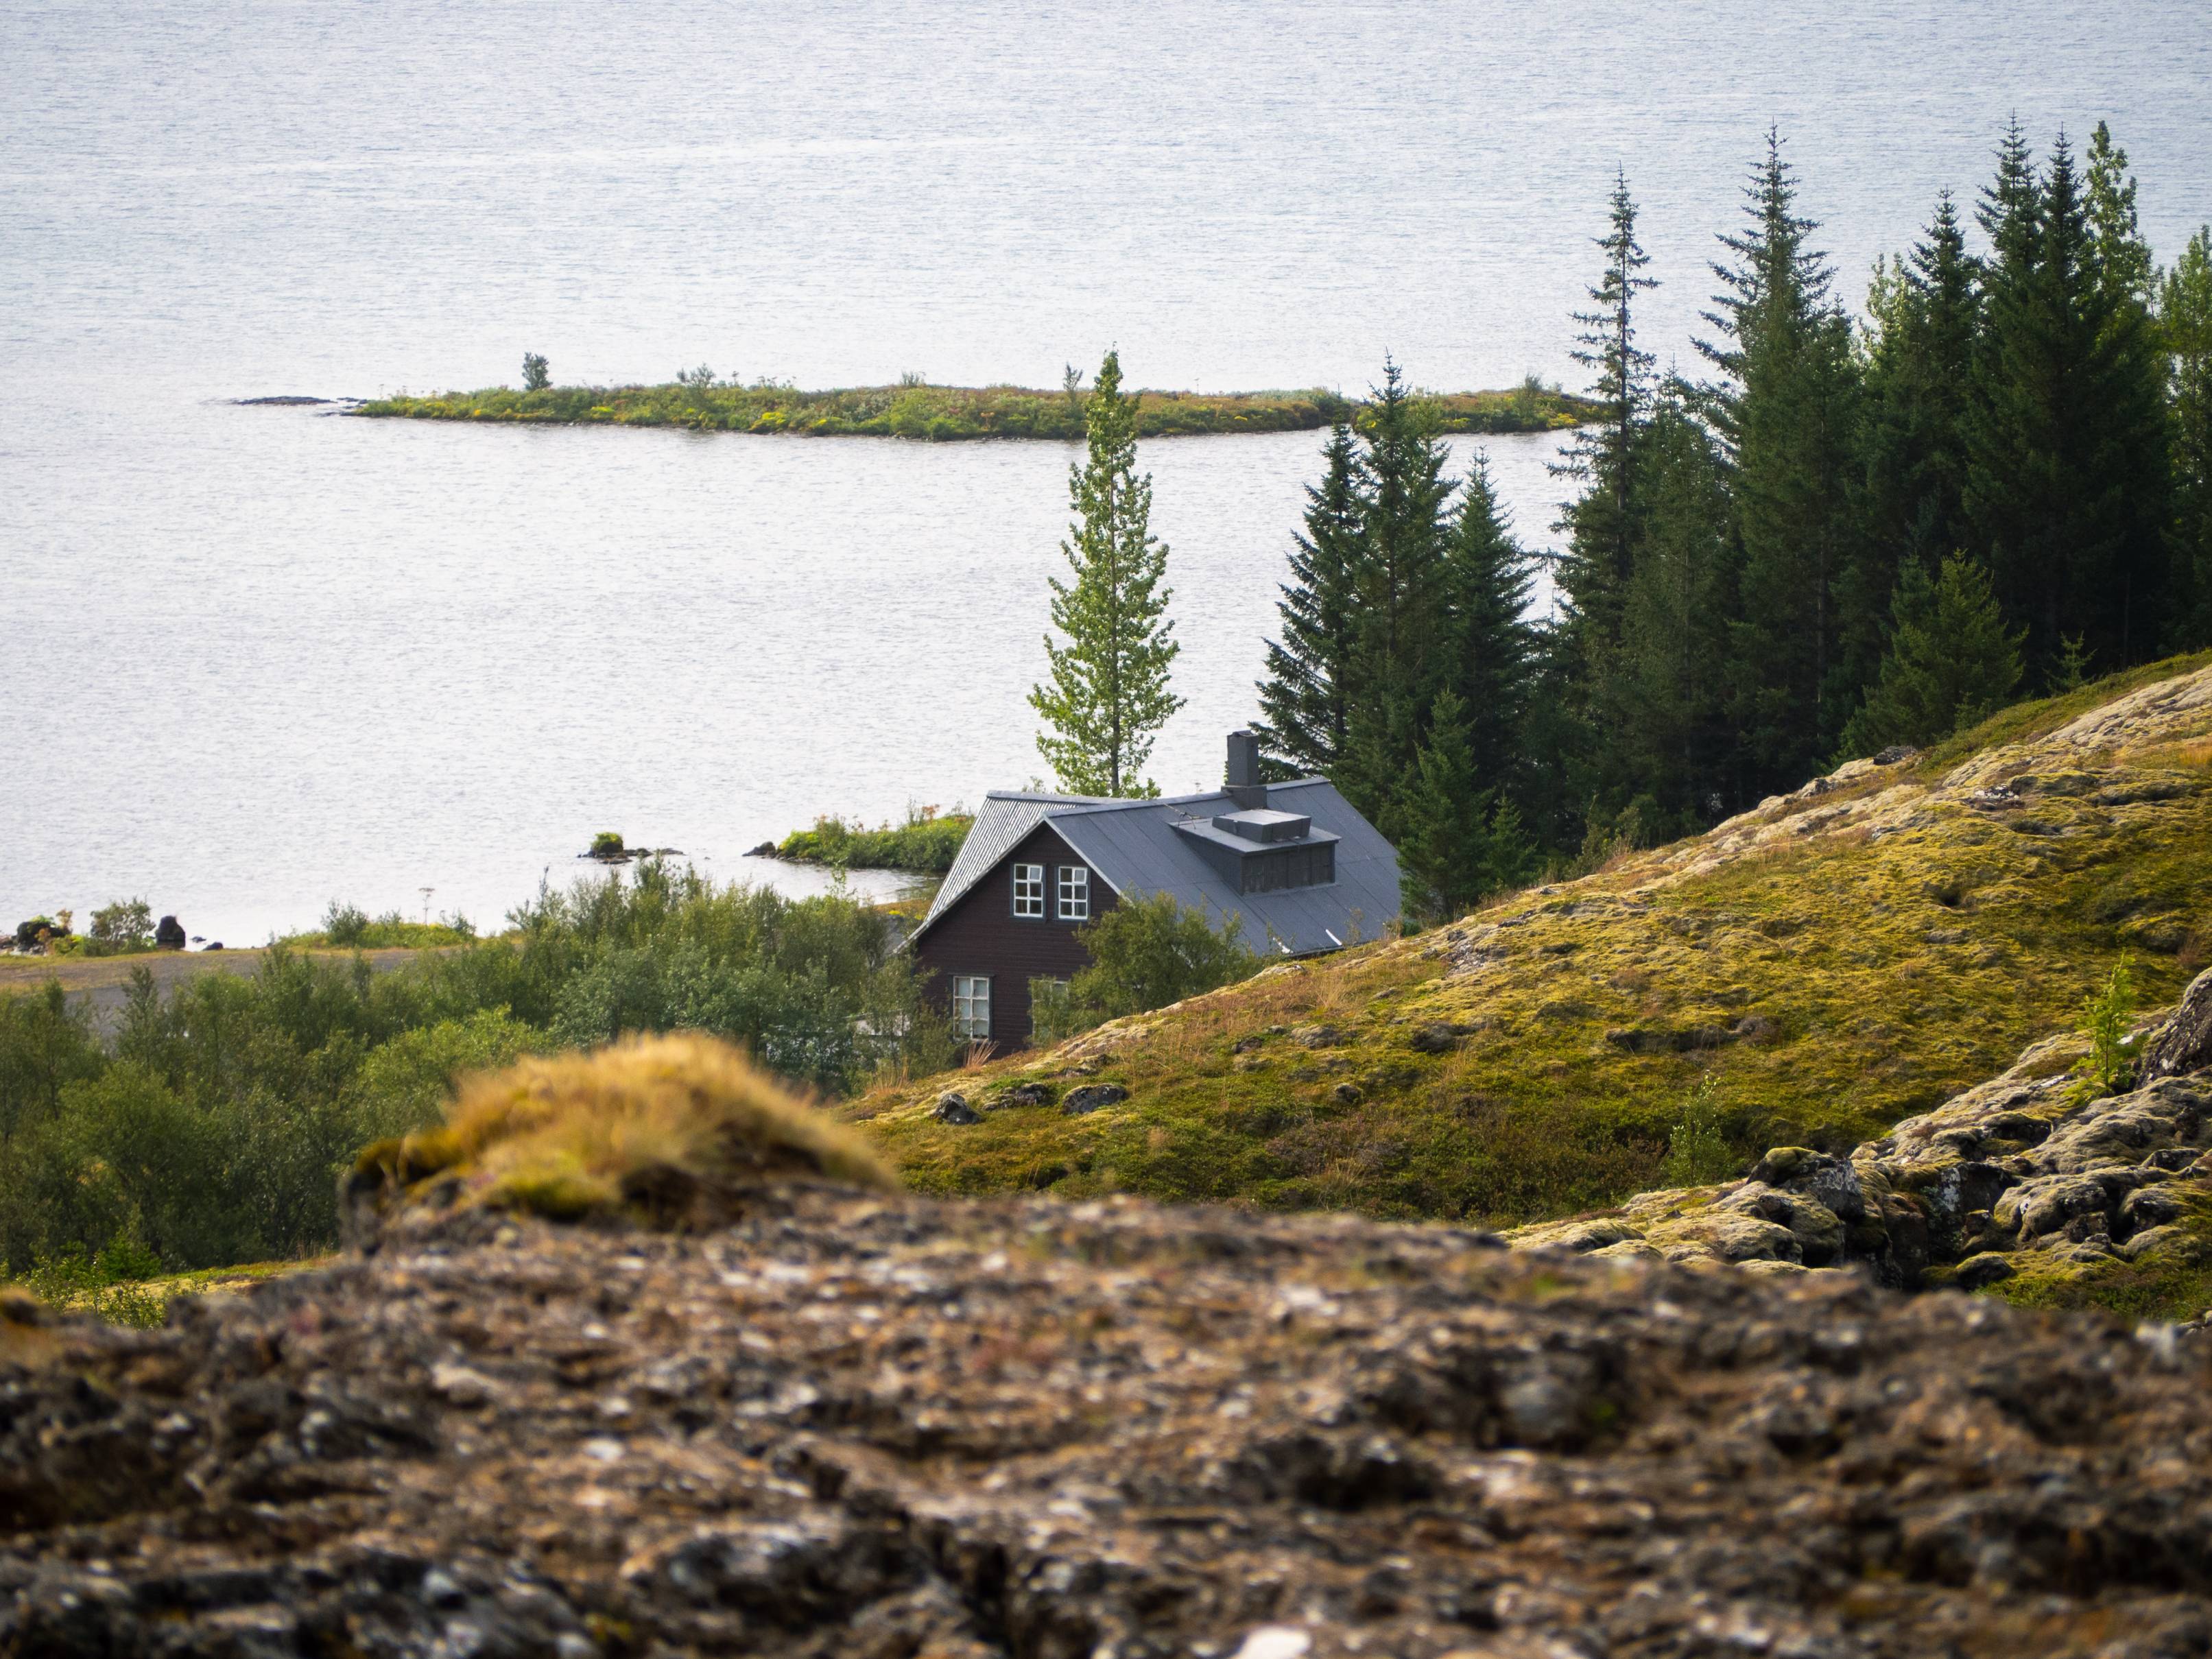 summer-cabin-in-iceland-standing-by-the-water-surrounded-by-trees-in-summer